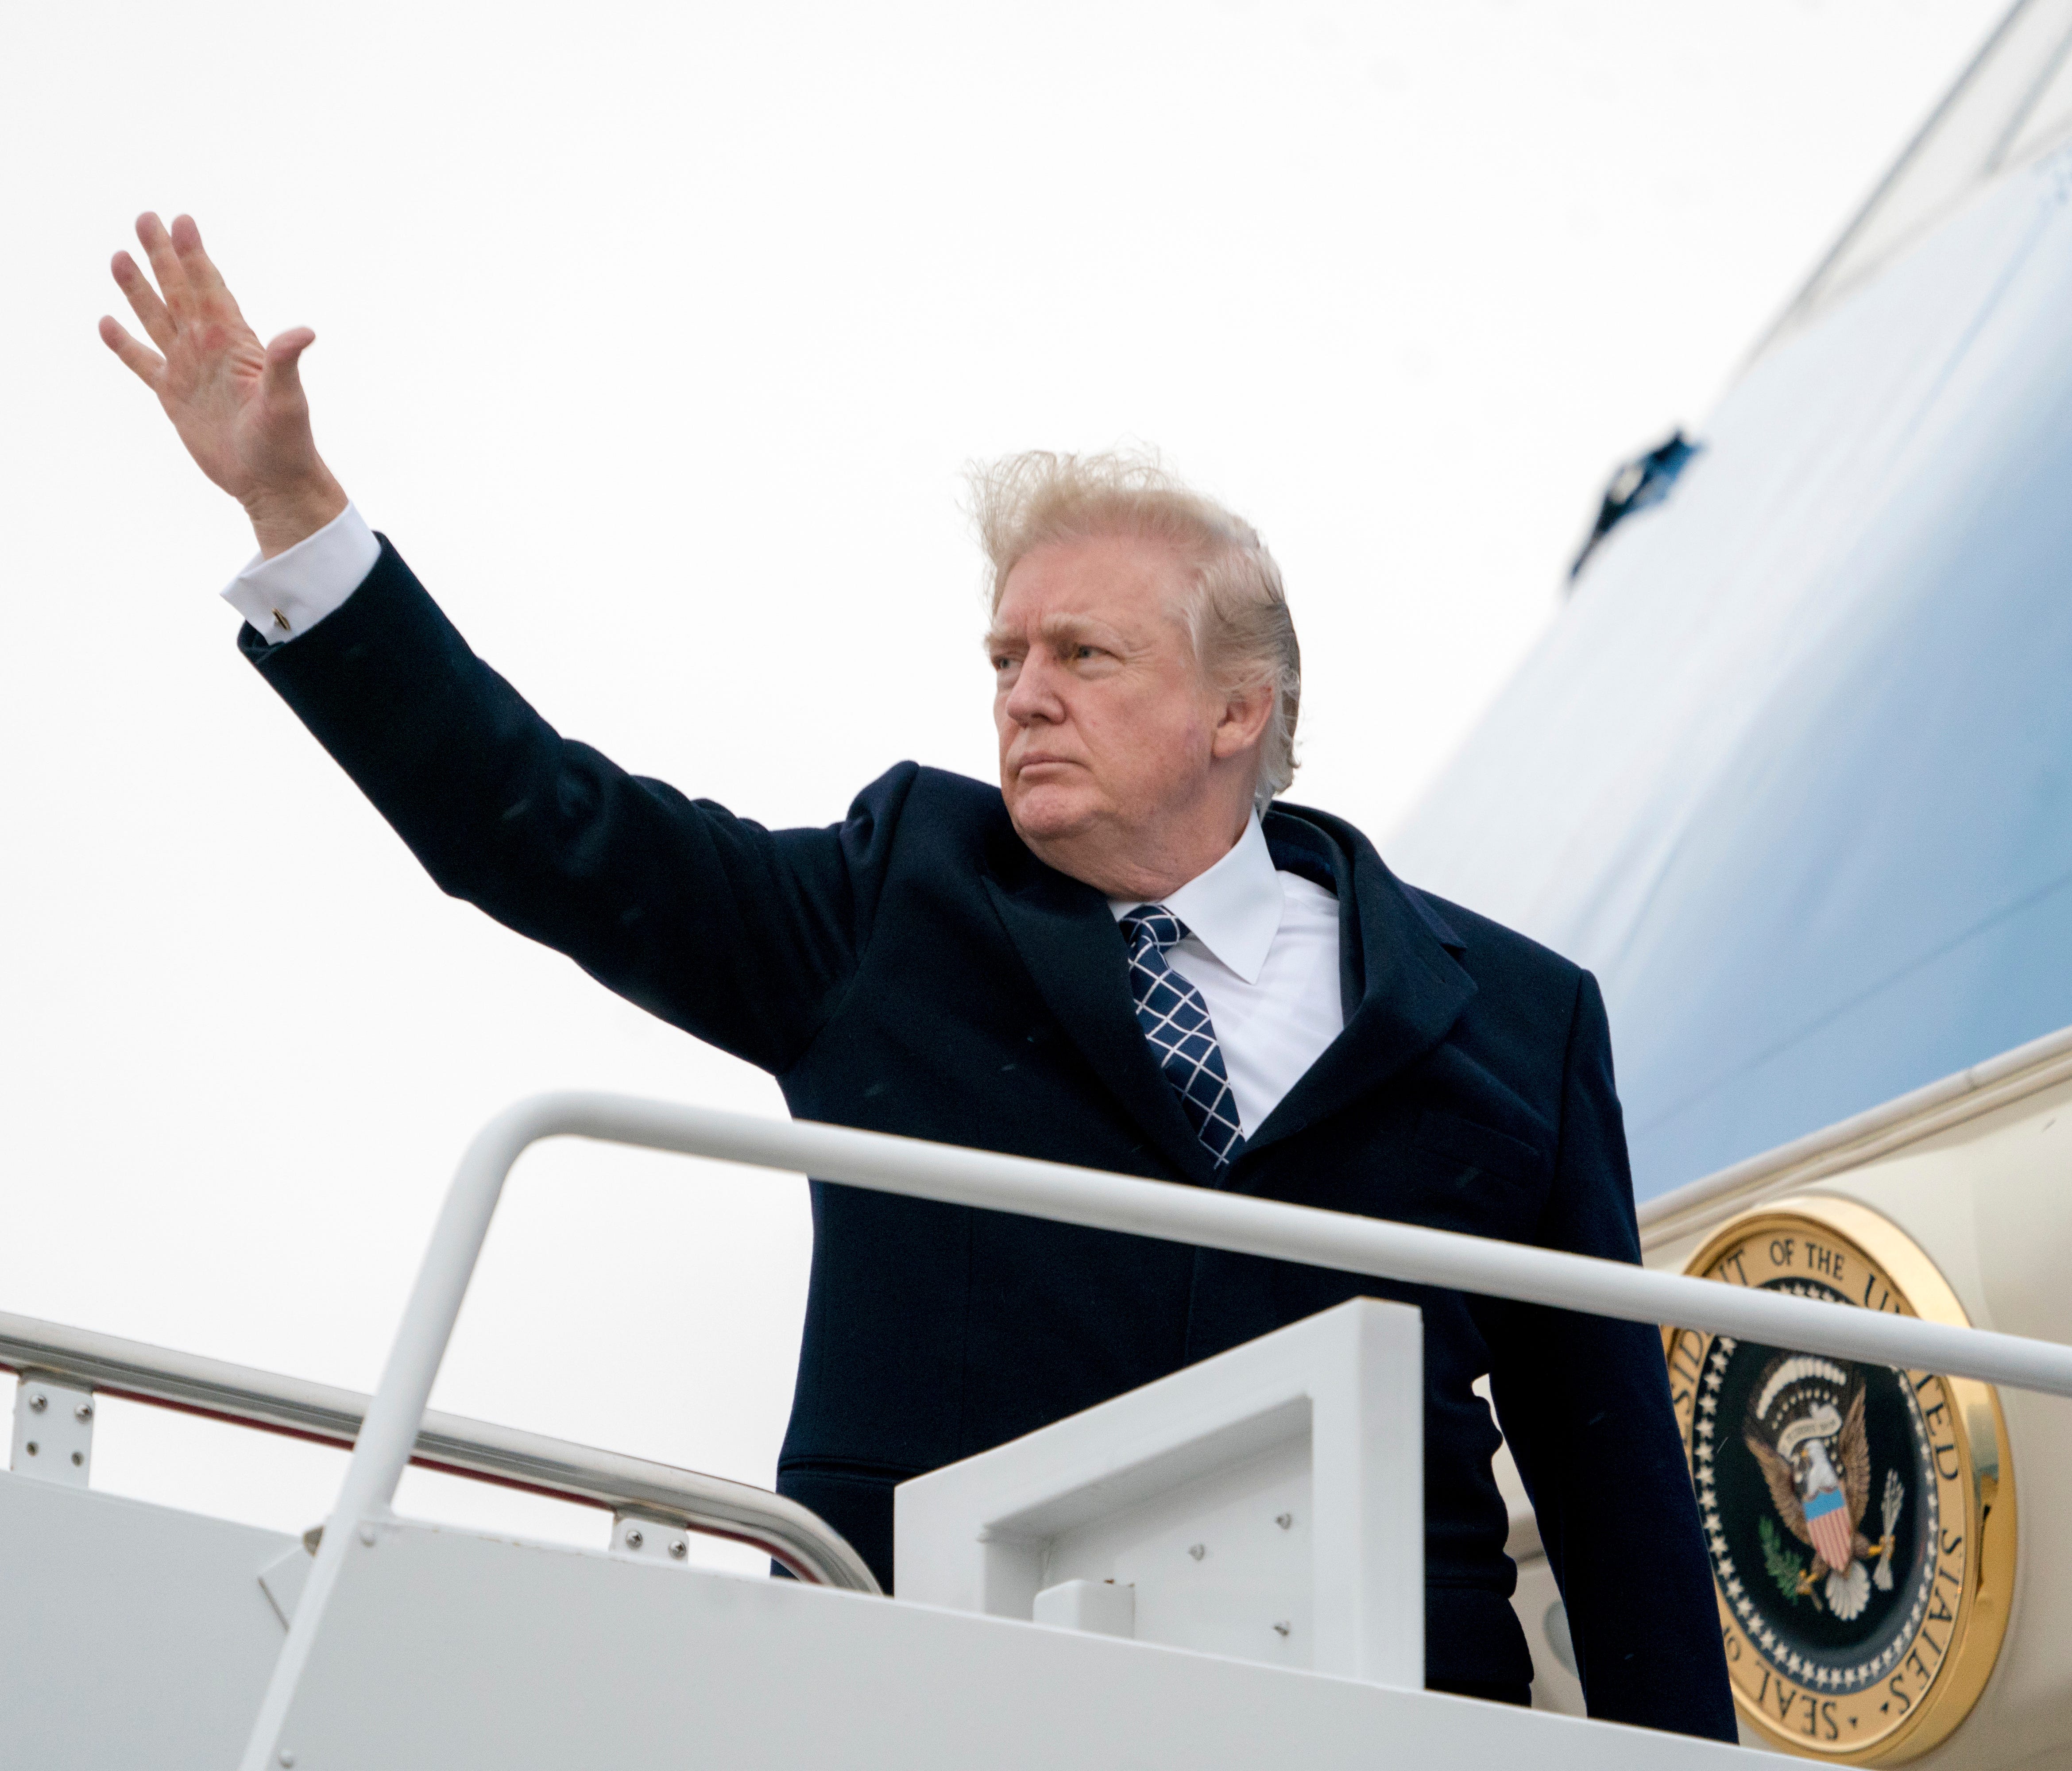 President Trump waves as he boards Air Force One at Andrews Air Force Base, Md., Friday, Jan. 12, 2018, to travel to Palm Beach International Airport in West Palm Beach, Fla.